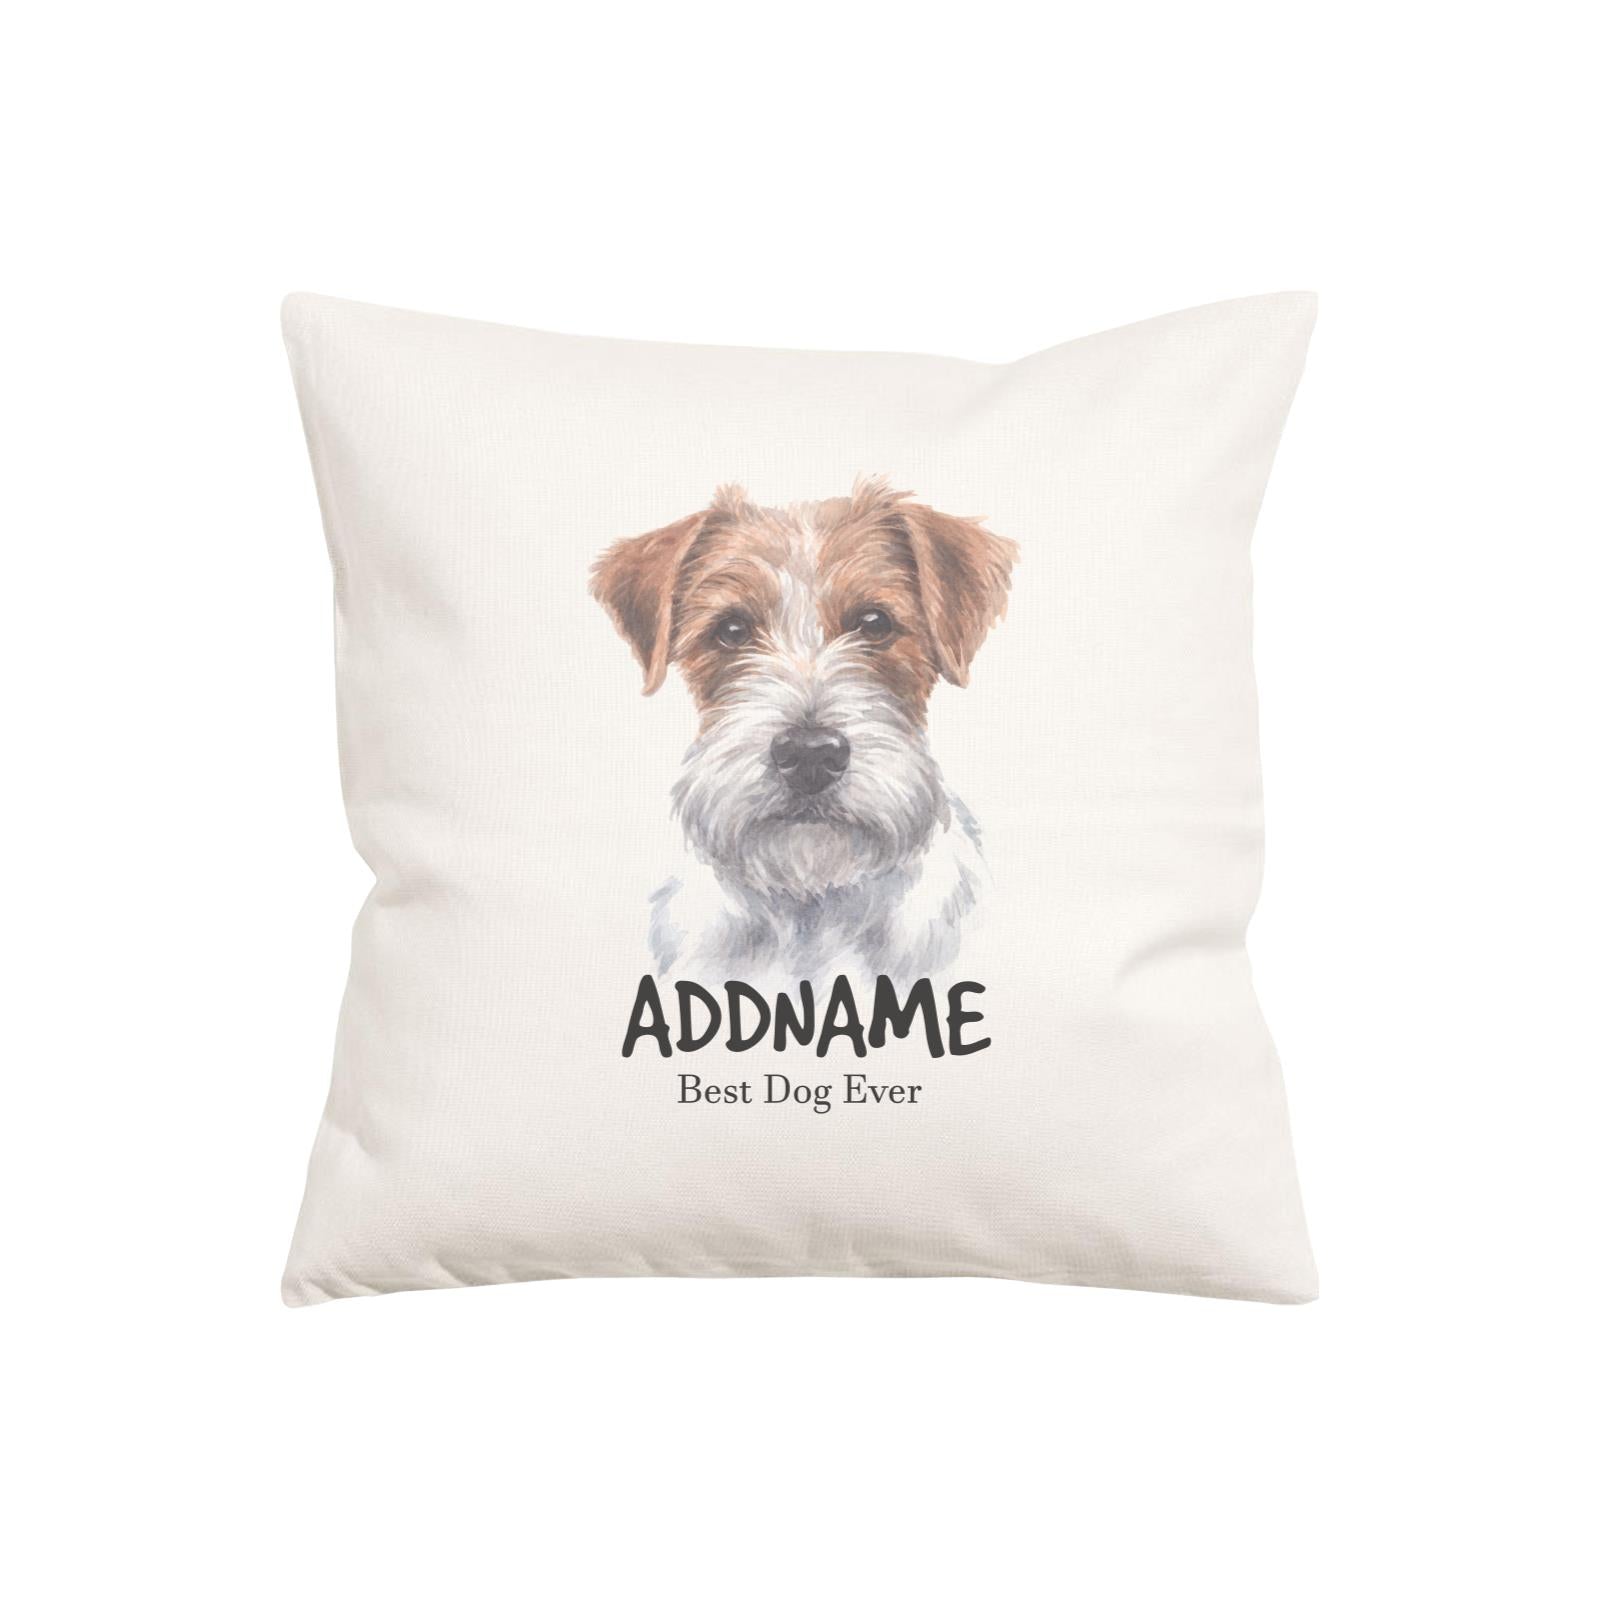 Watercolor Dog Series Jack Russell Hairy Best Dog Ever Addname Pillow Cushion